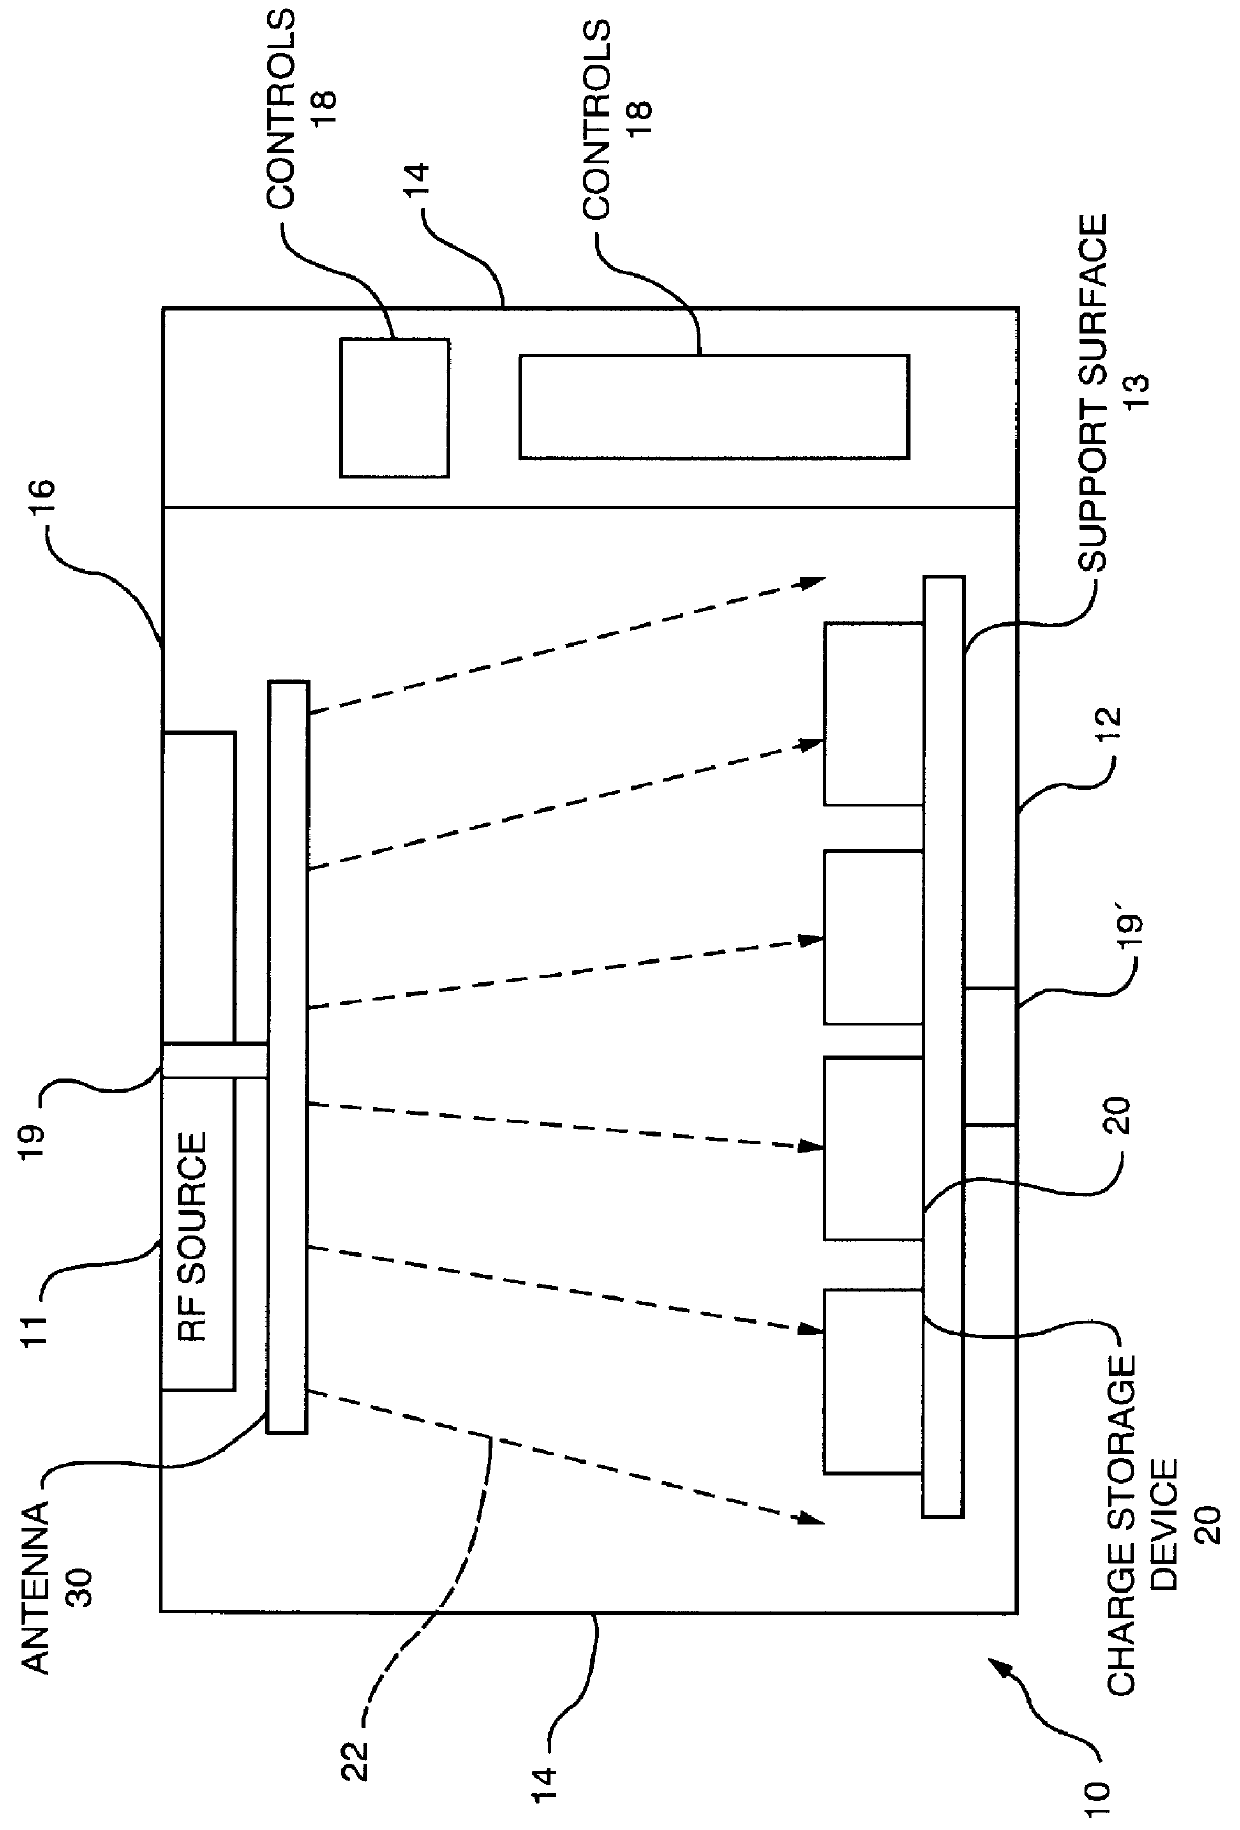 Method and apparatus for wireless powering and recharging